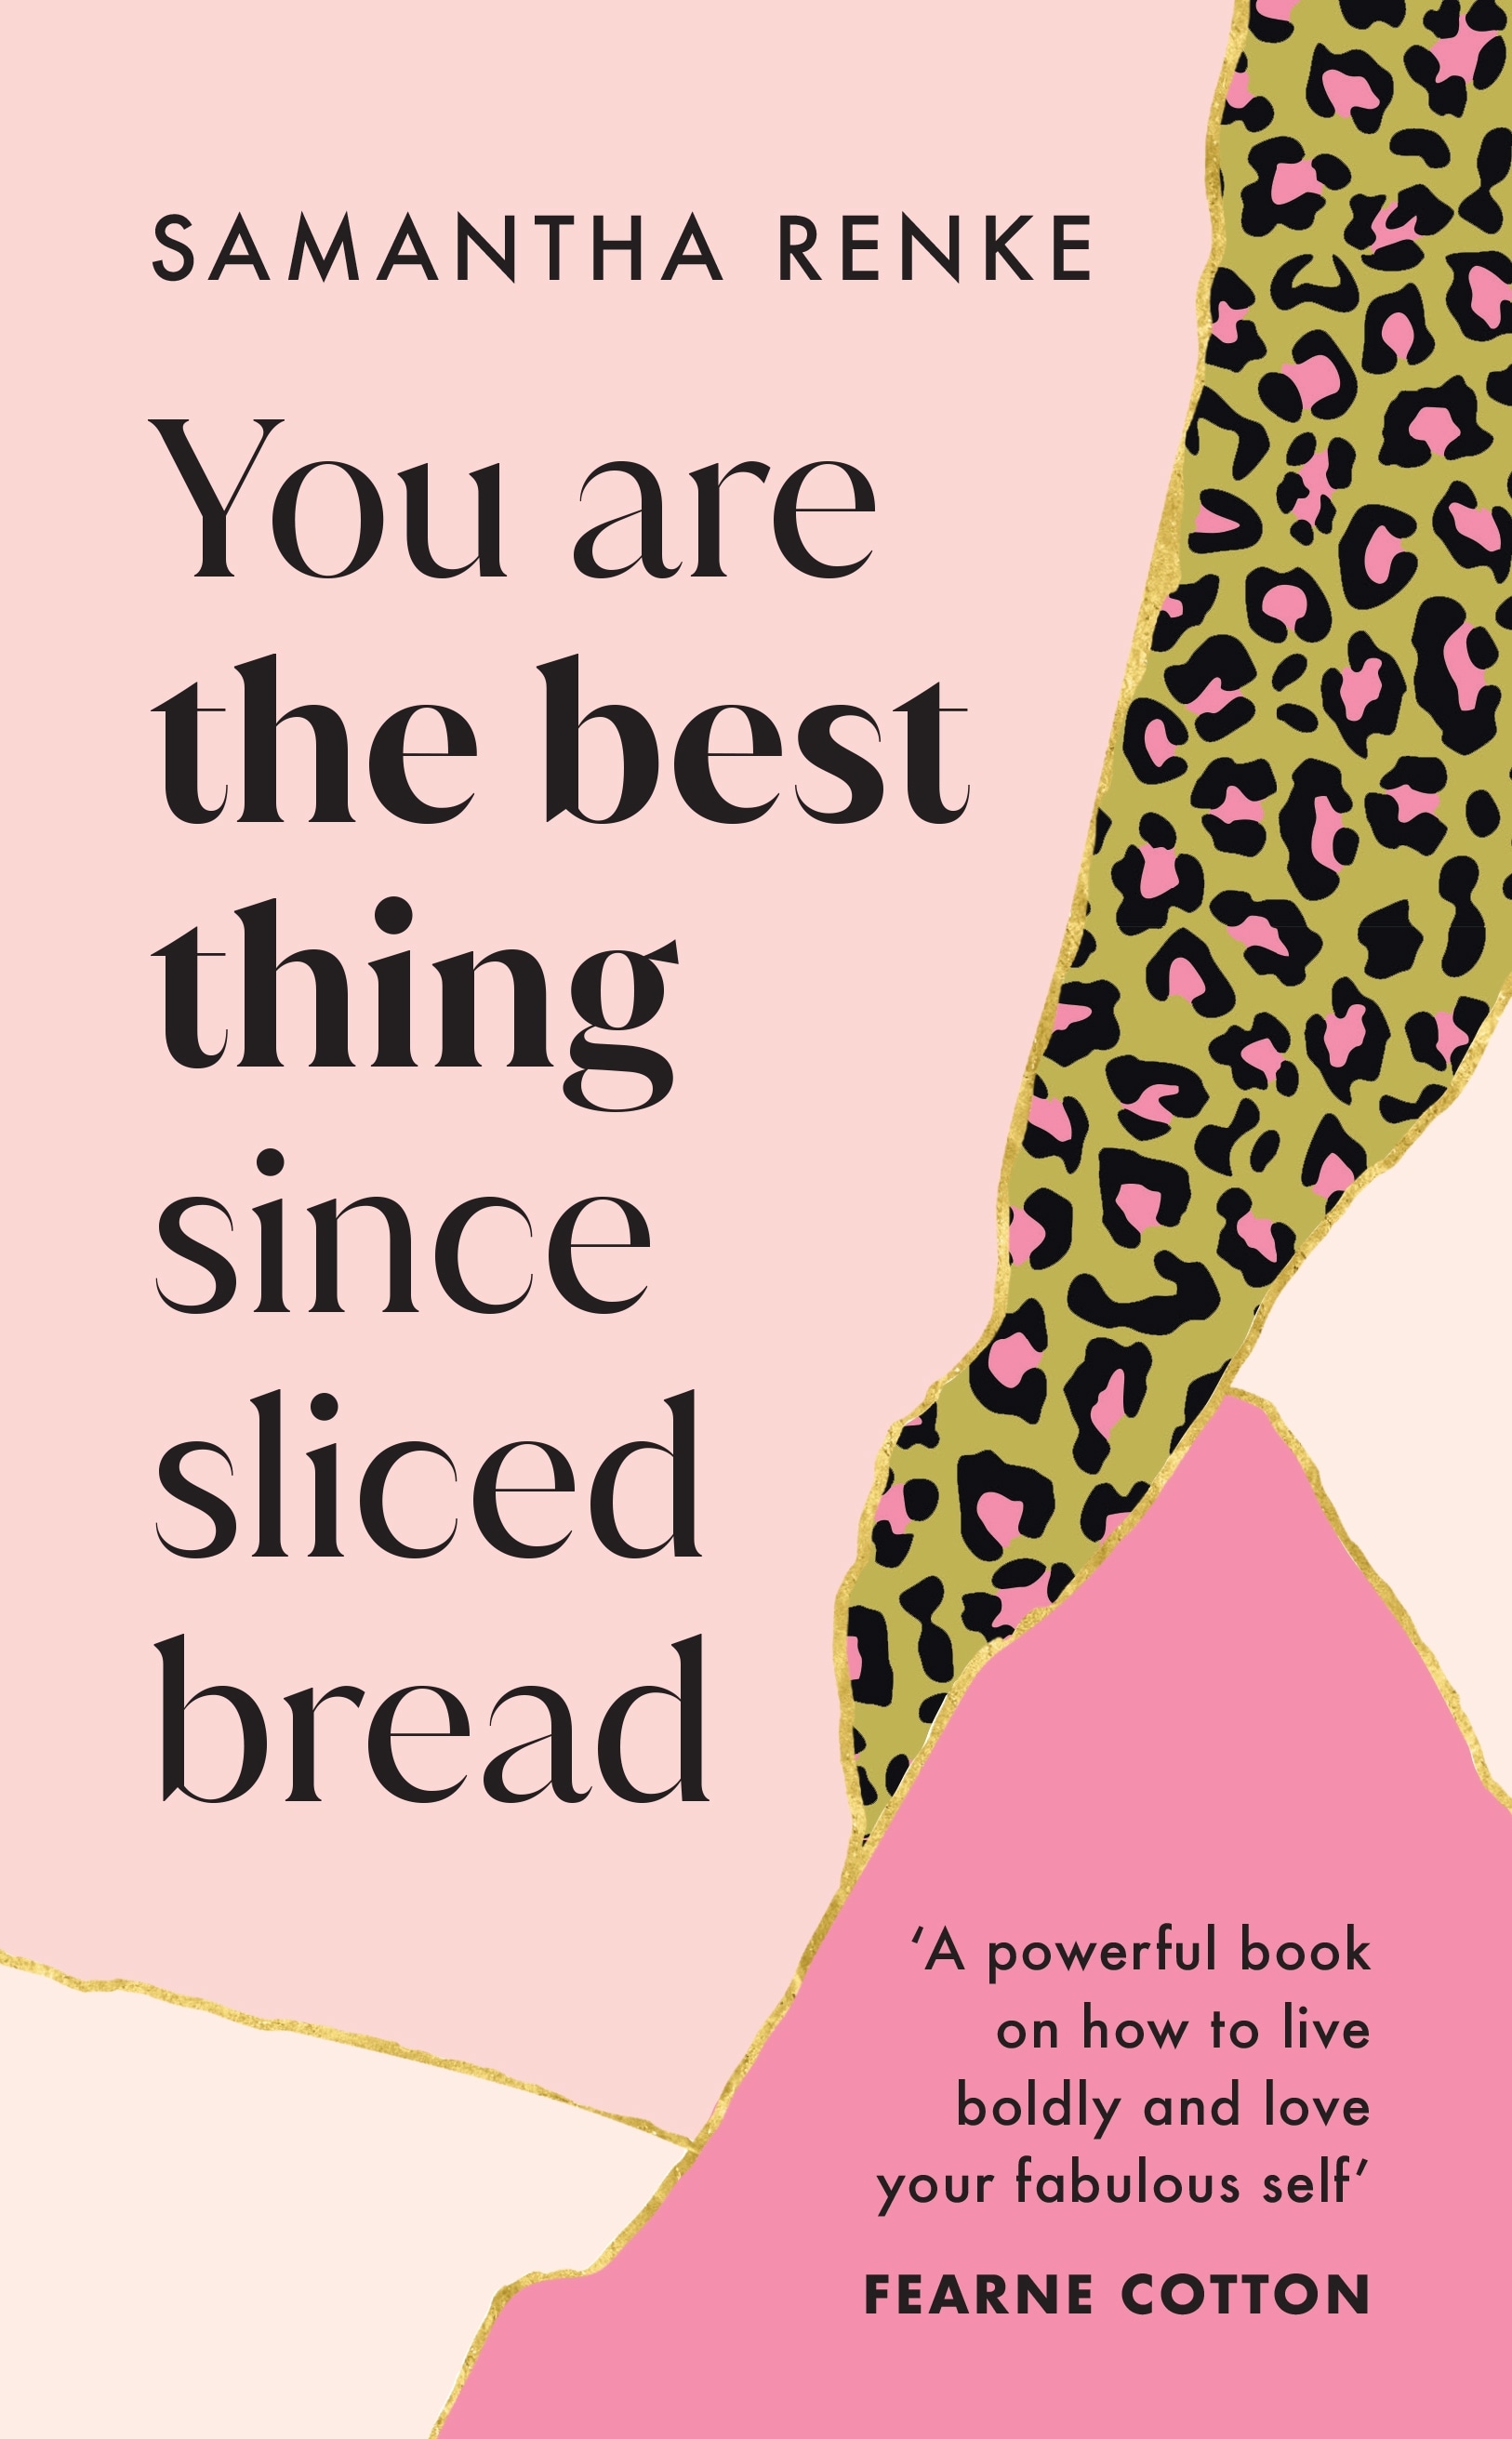 Book “You Are The Best Thing Since Sliced Bread” by Samantha Renke — July 21, 2022